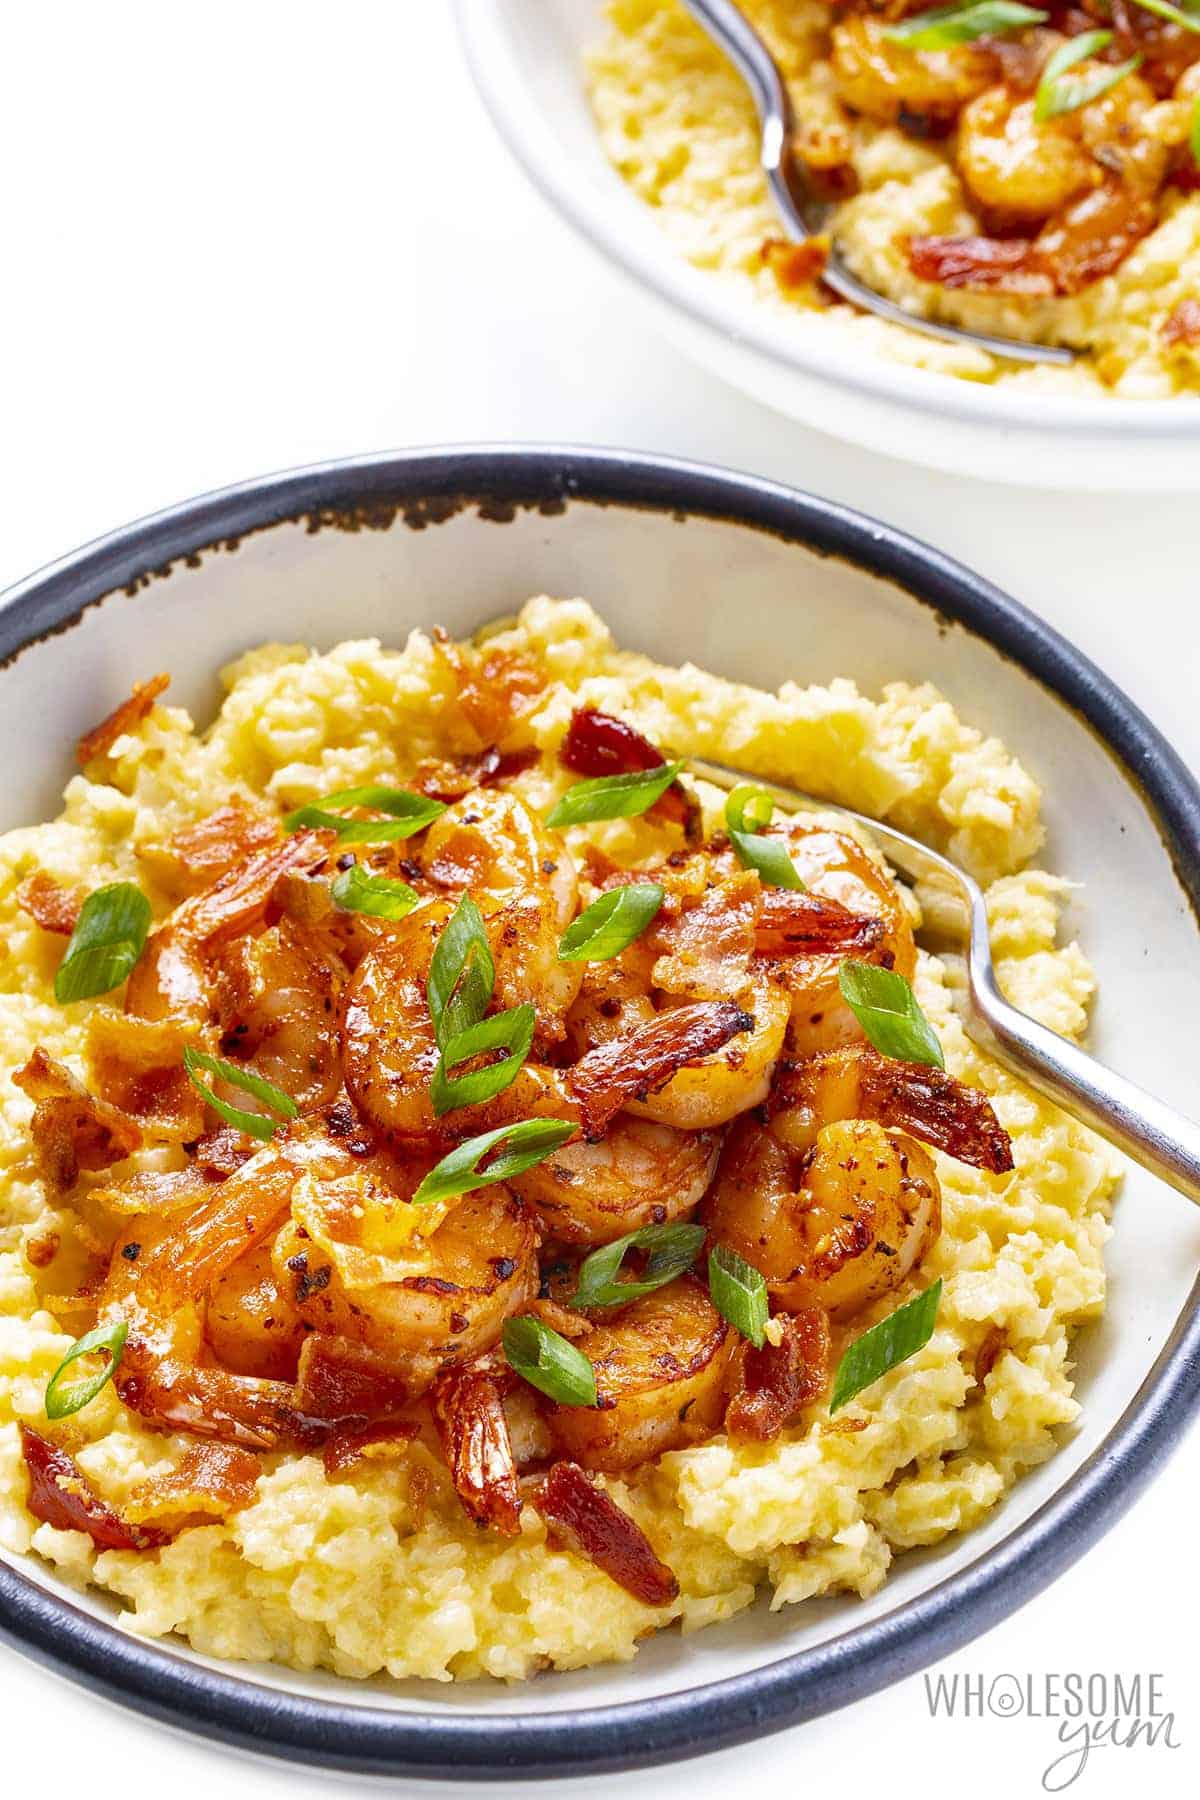 Cauliflower grits with shrimp plated